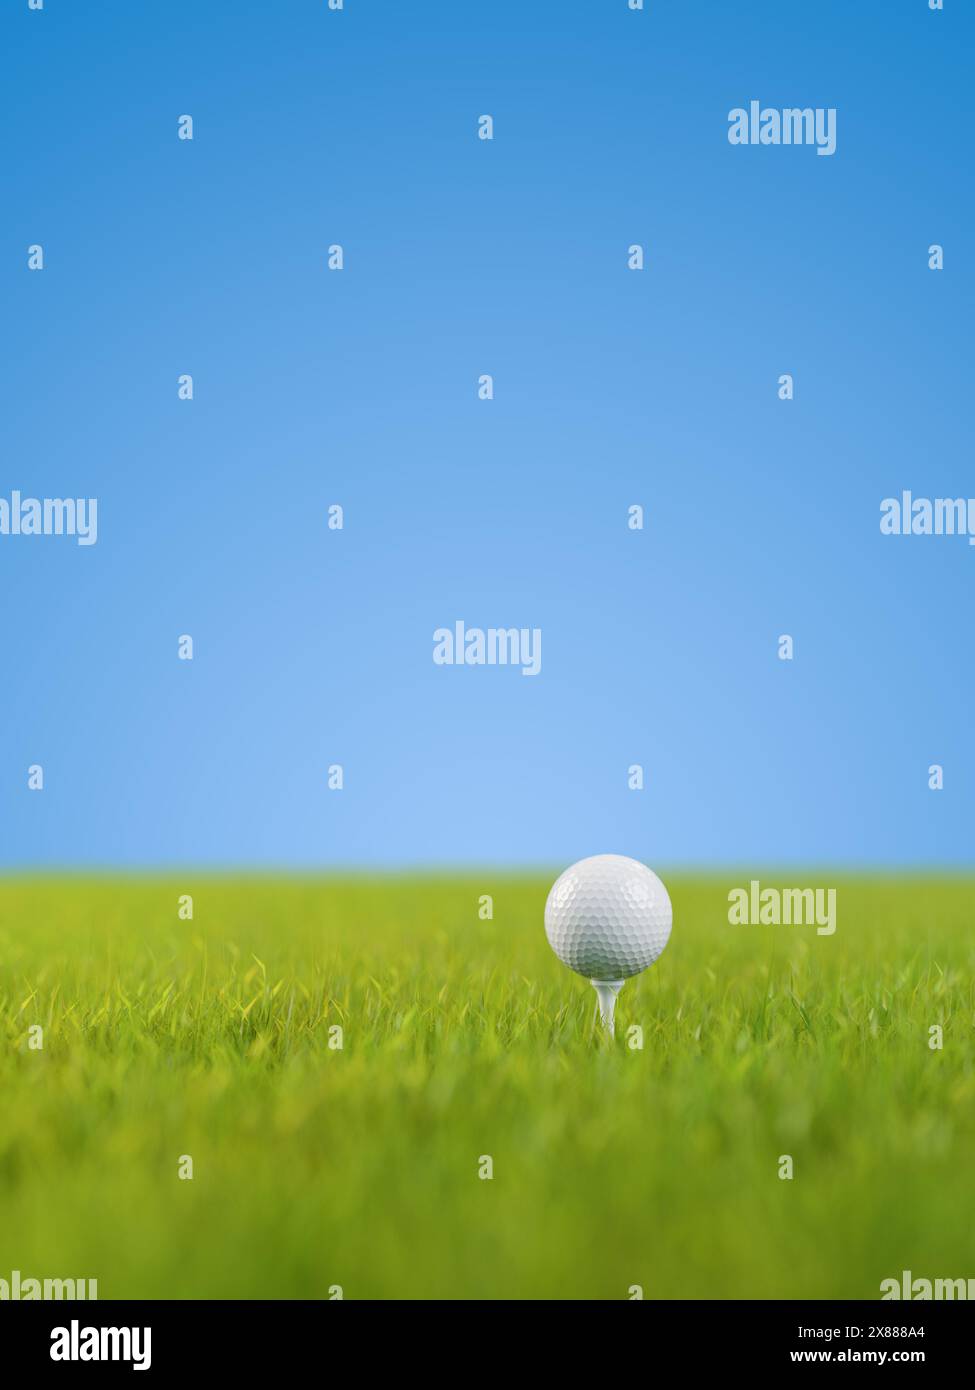 A golf ball on a golf tee on a lawn. Selective focus - very shallow depth of field. Blue background. Stock Photo